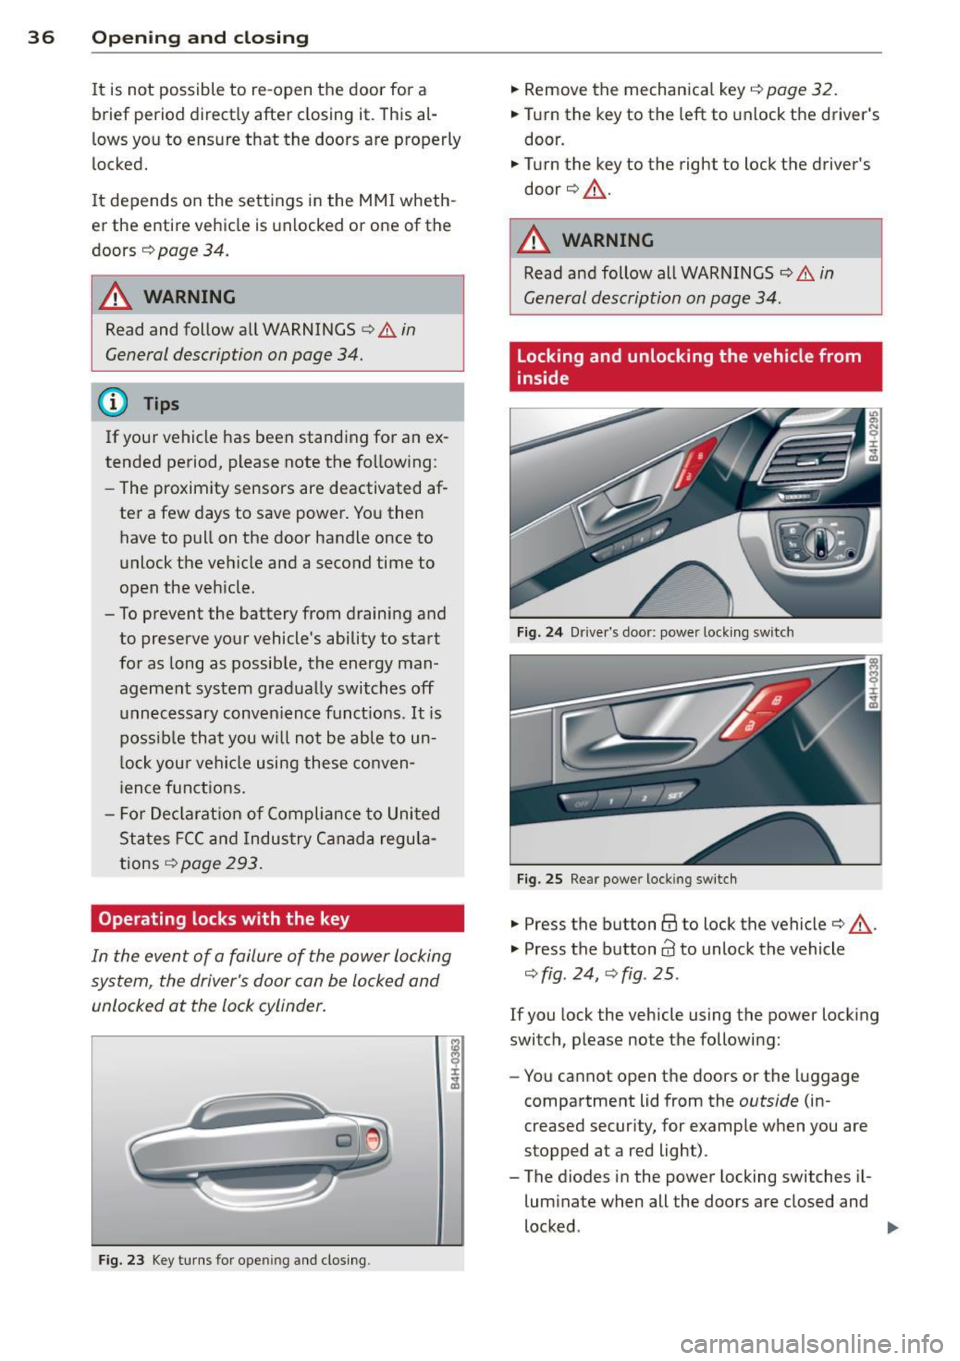 AUDI A8 2015  Owners Manual 36  Opening and  clo sing 
It  is not  possible  to  re-open  the  door  for  a 
brief  period  direct ly after  closing  it. This  al­
l ows  you  to  ensure  that  the  doors  are  properly 
locked